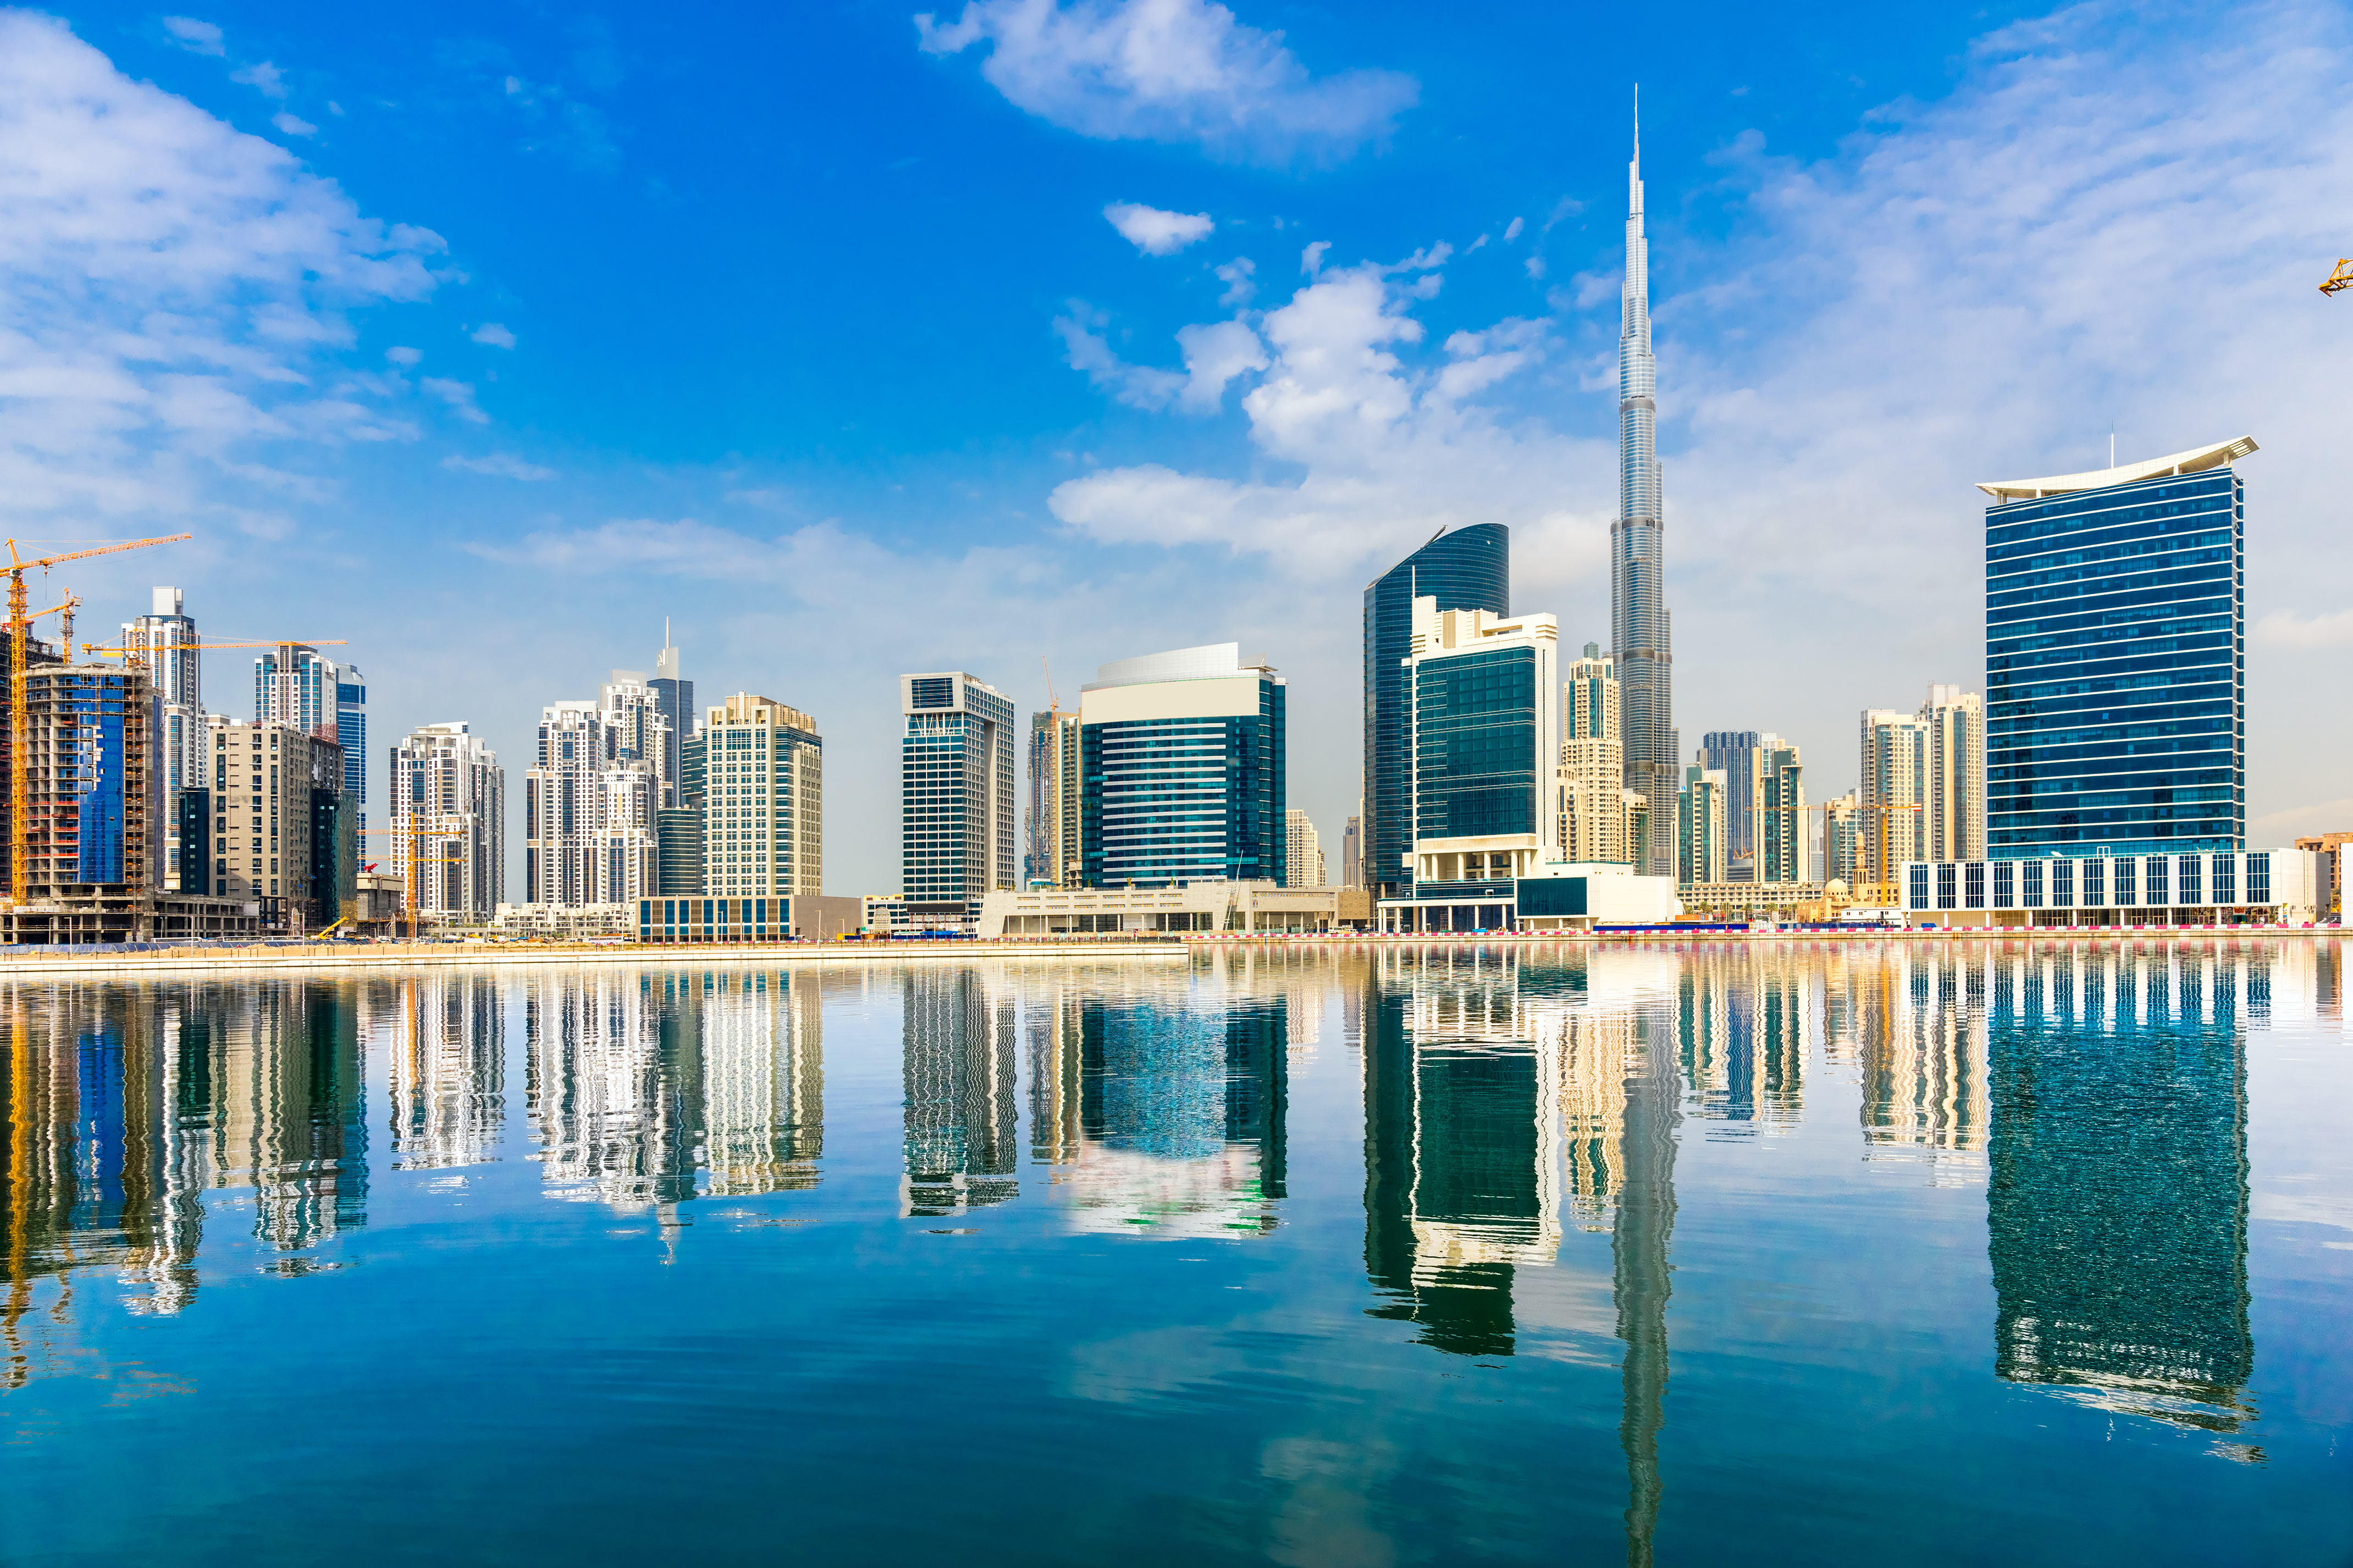 Dubai, a place where foreigners can get a job in the UAE